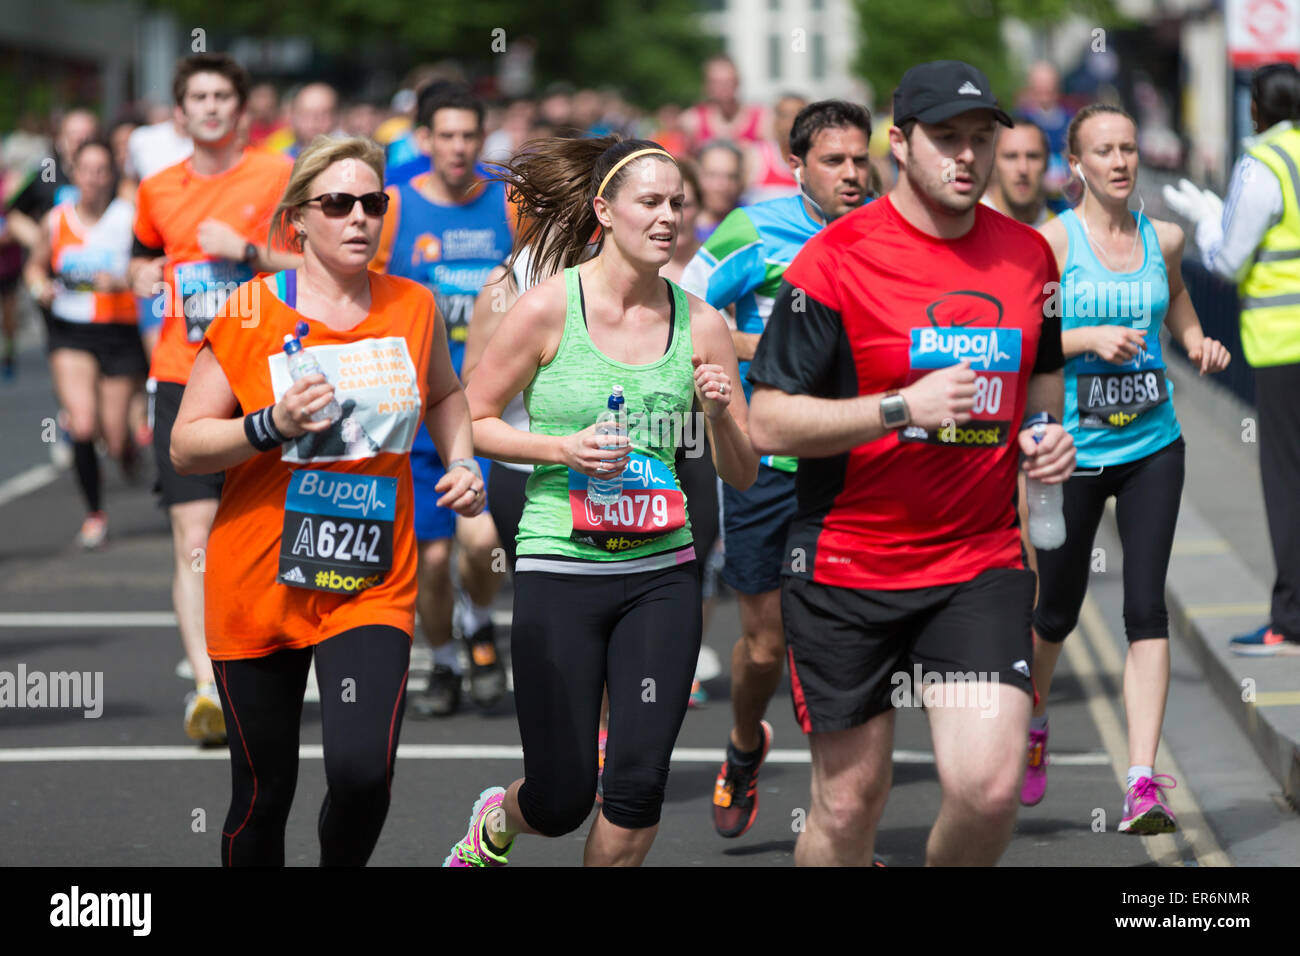 Competitors running at the Bupa London 10,000 run on Monday 25th May 2015 Stock Photo